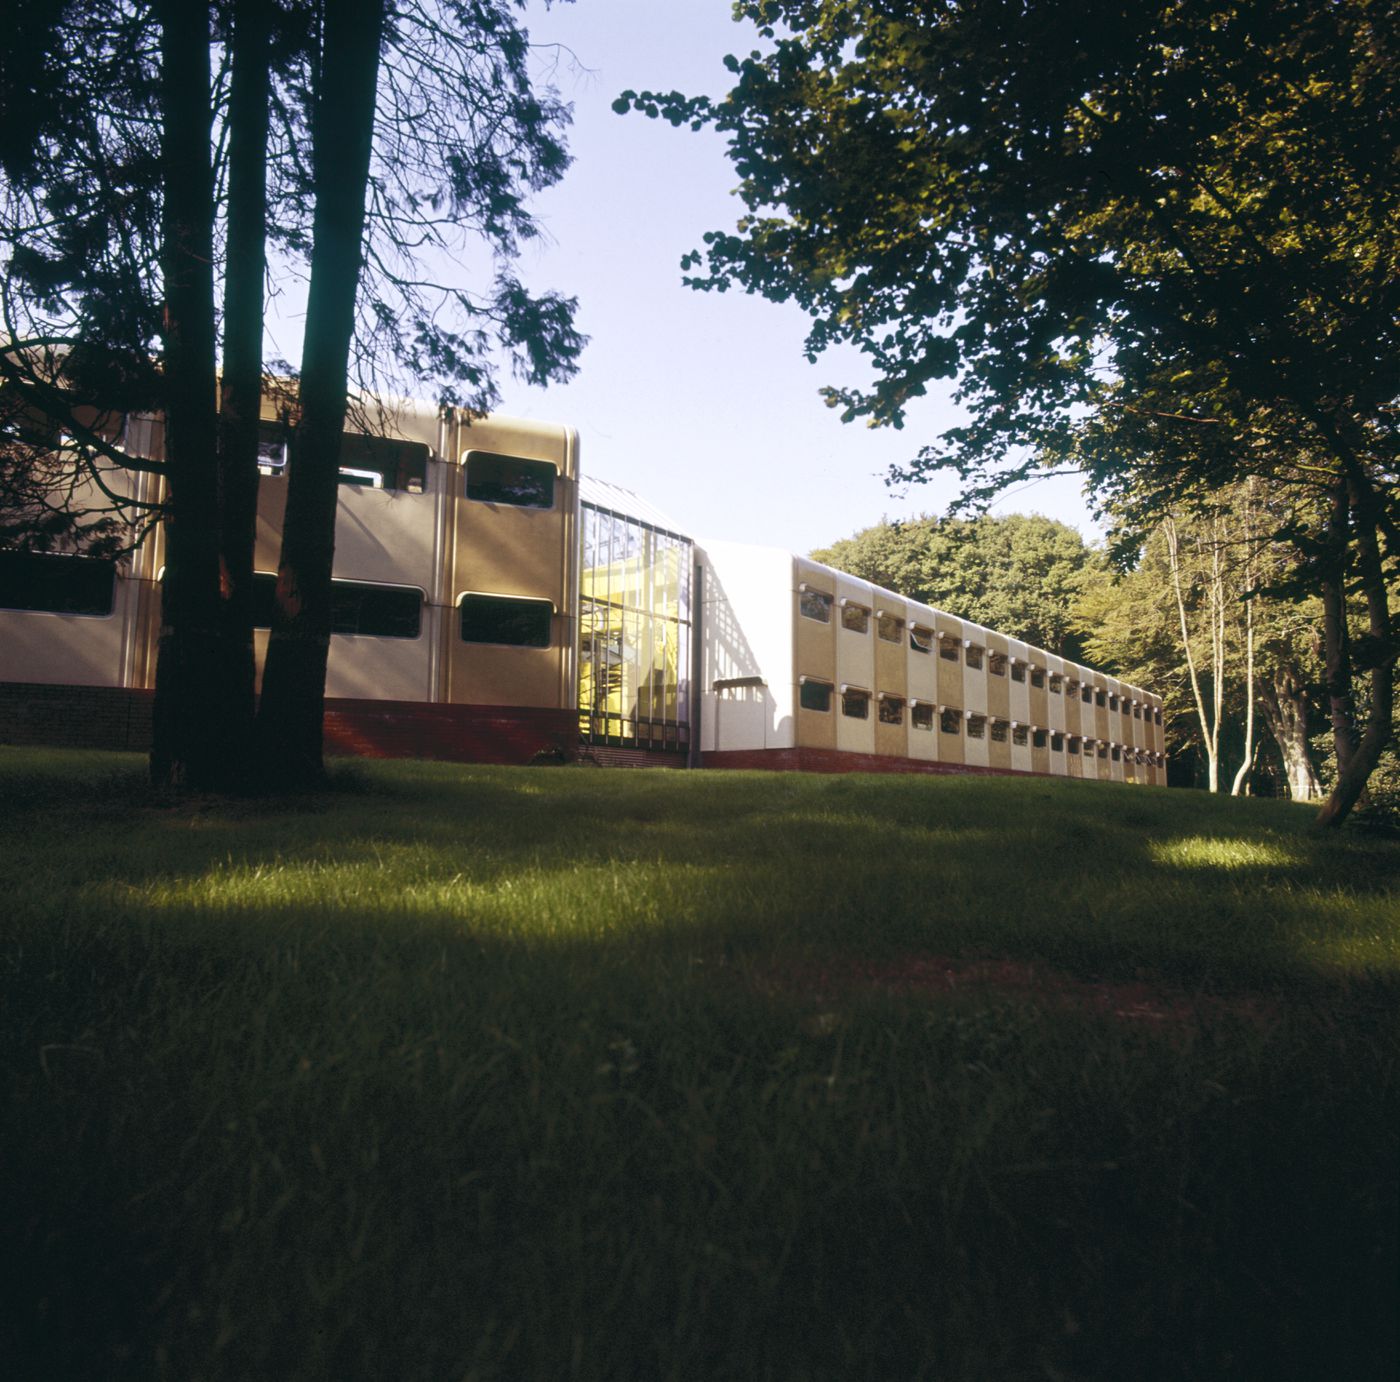 Olivetti Training Centre, Haslemere, England: exterior view